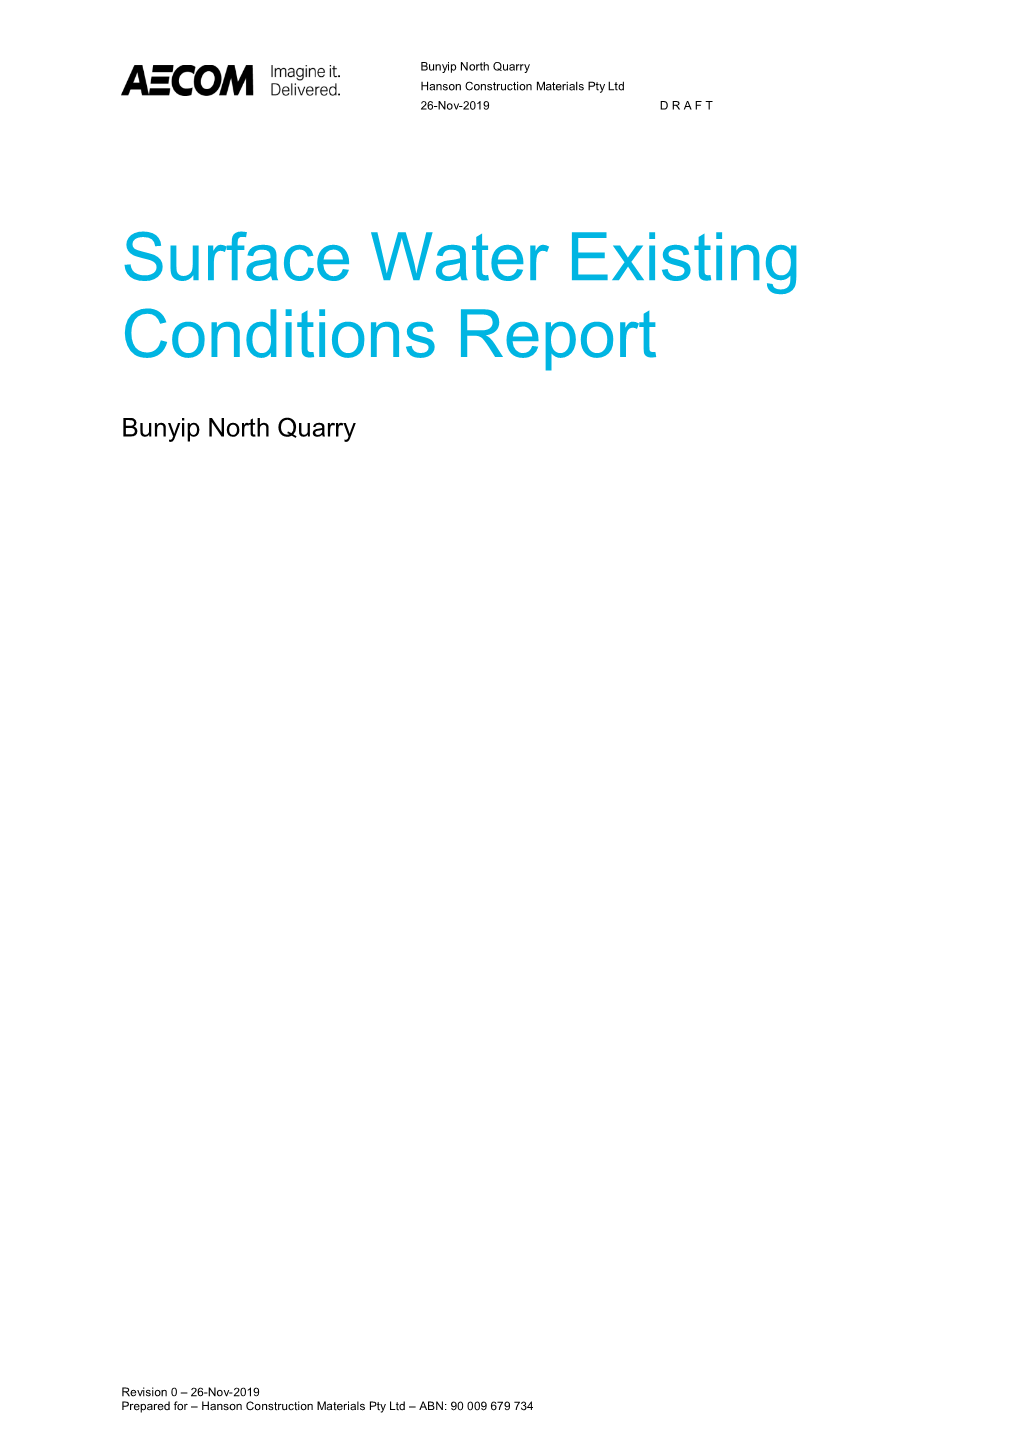 Surface Water Existing Conditions Report